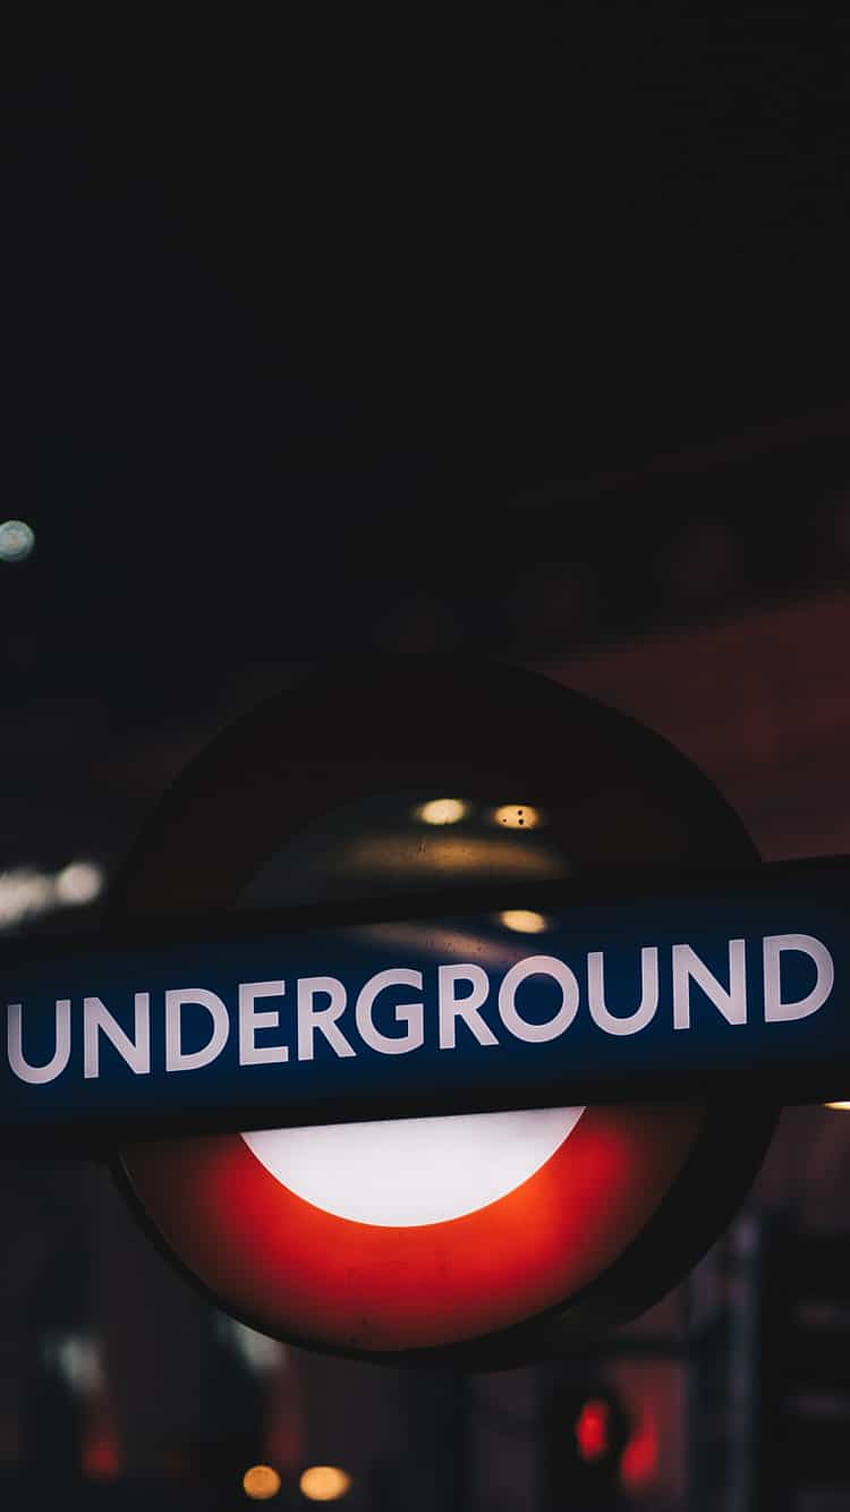 23 Phone With A London Theme, underground houses HD phone wallpaper